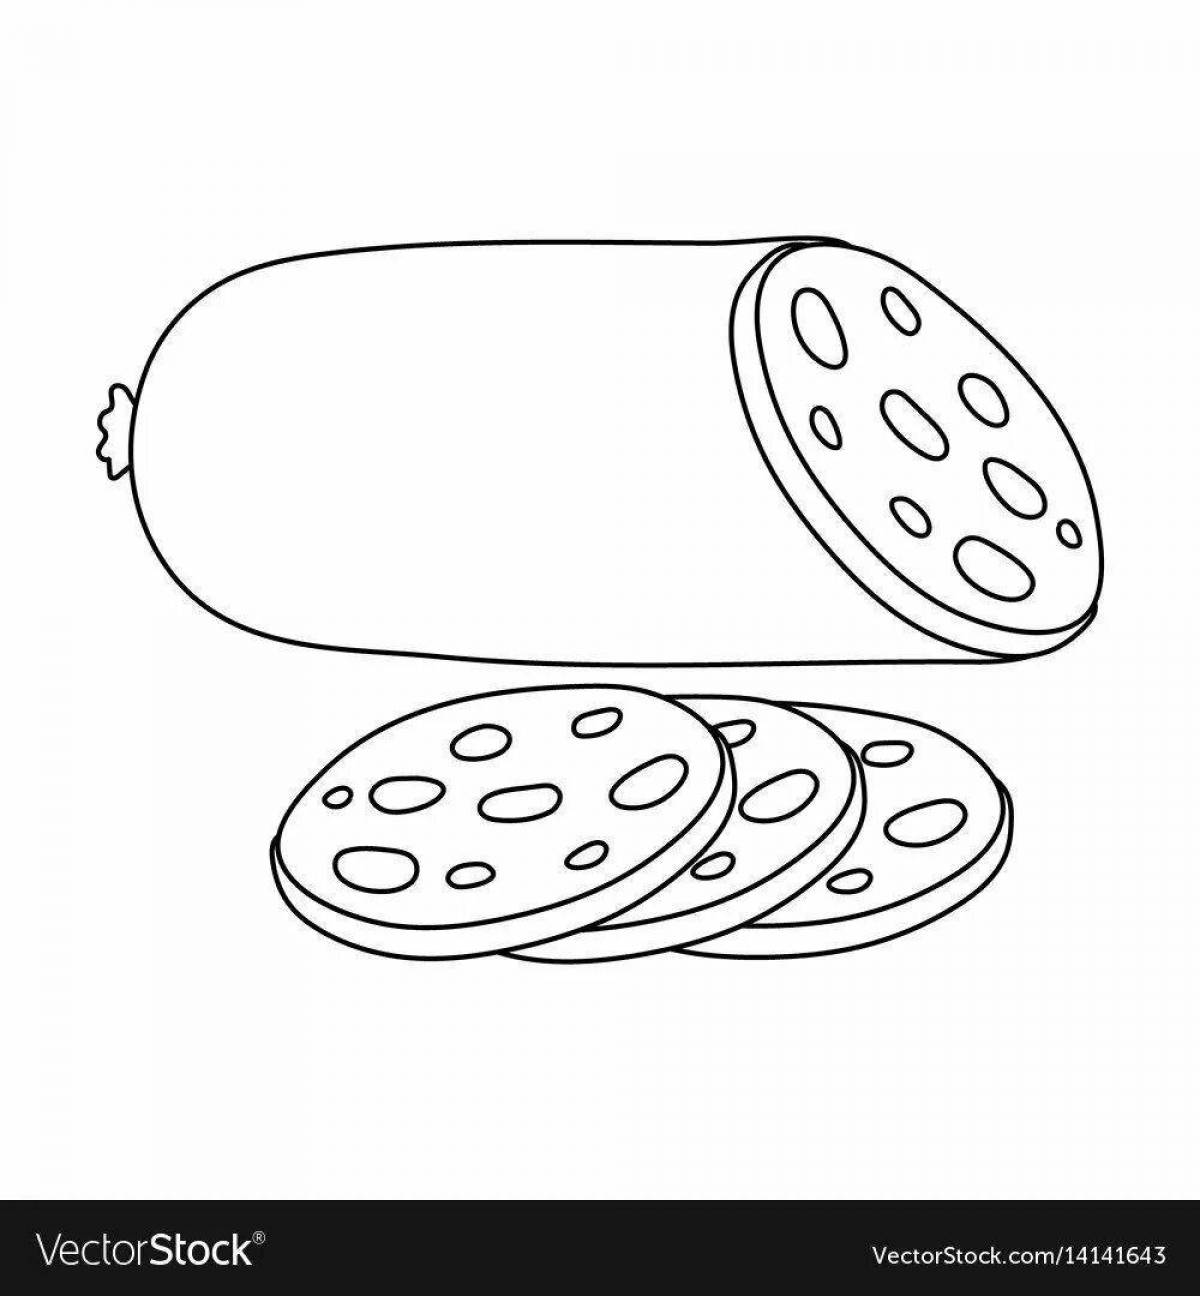 Colourful sausage coloring page for kids